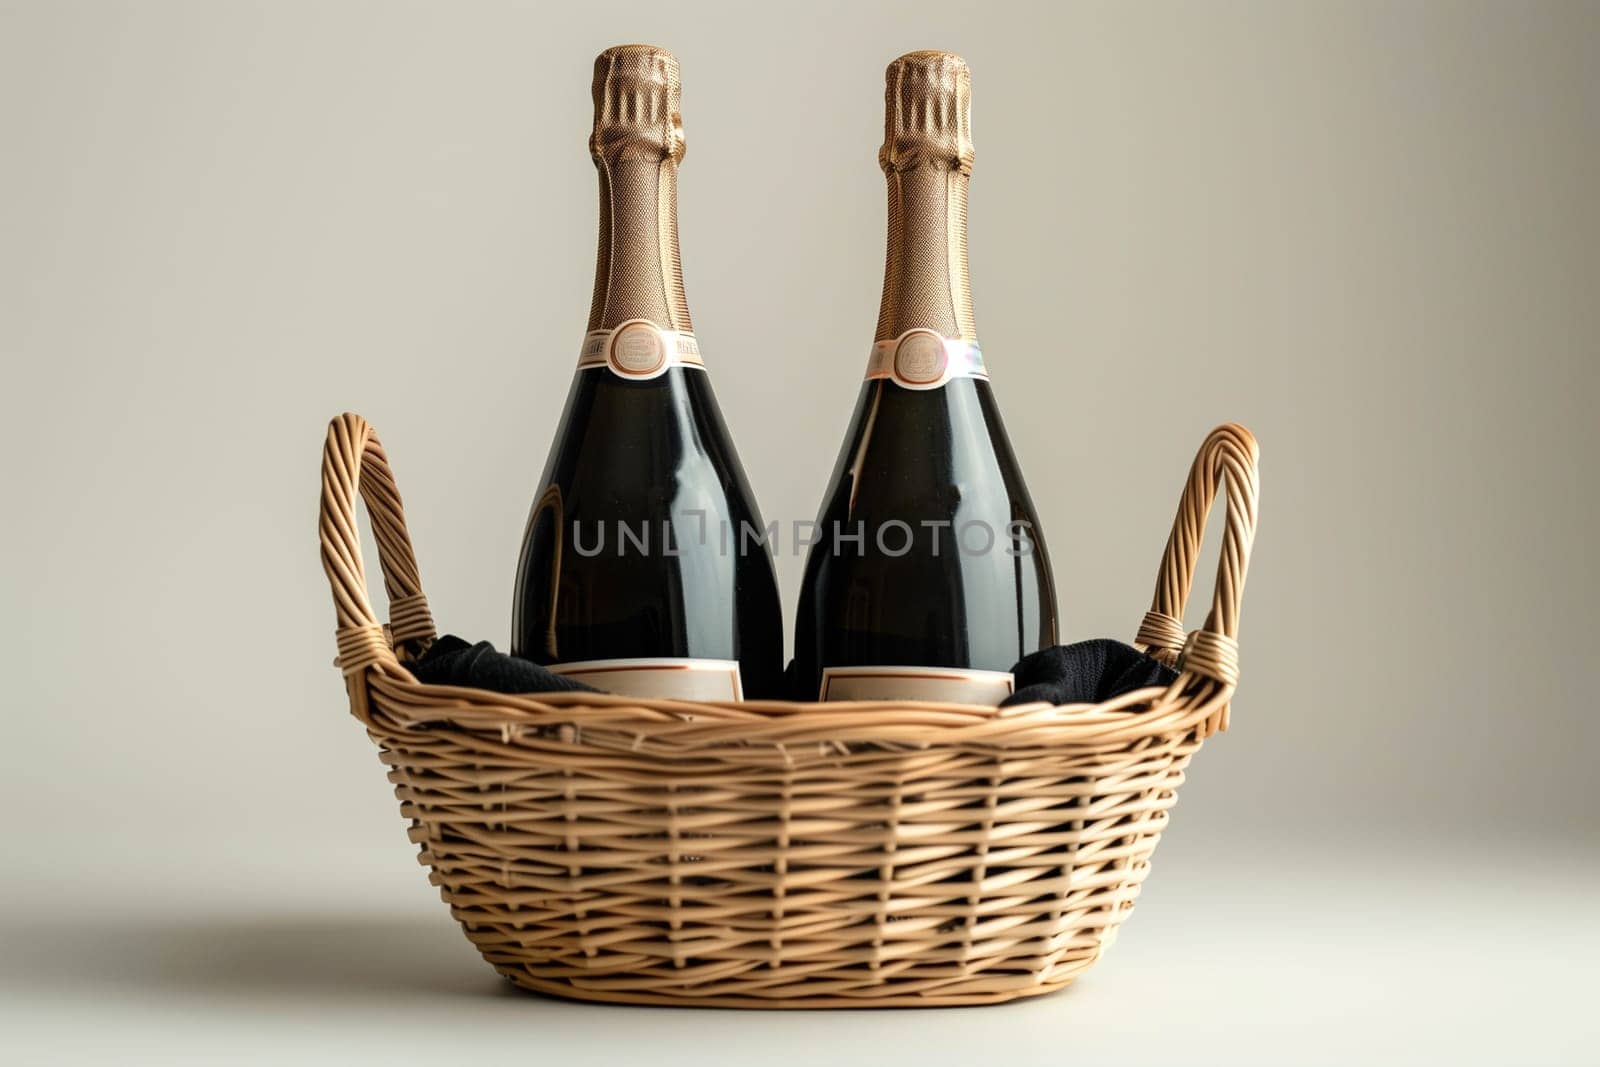 Two Champagne Bottles in a Wicker Basket With Ribbons by Sd28DimoN_1976